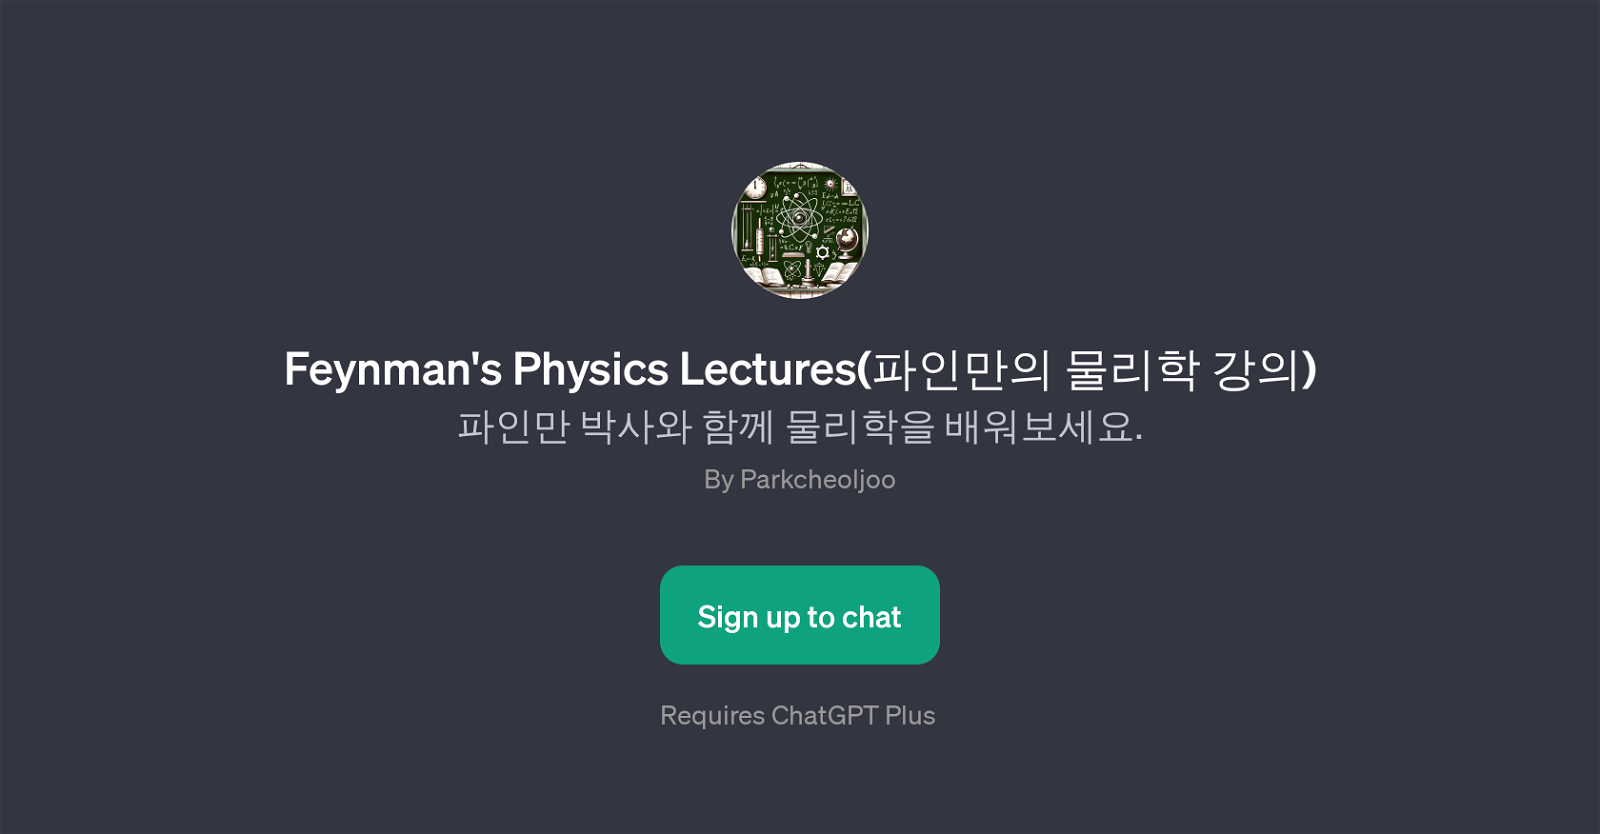 Feynman's Physics Lectures GPT website